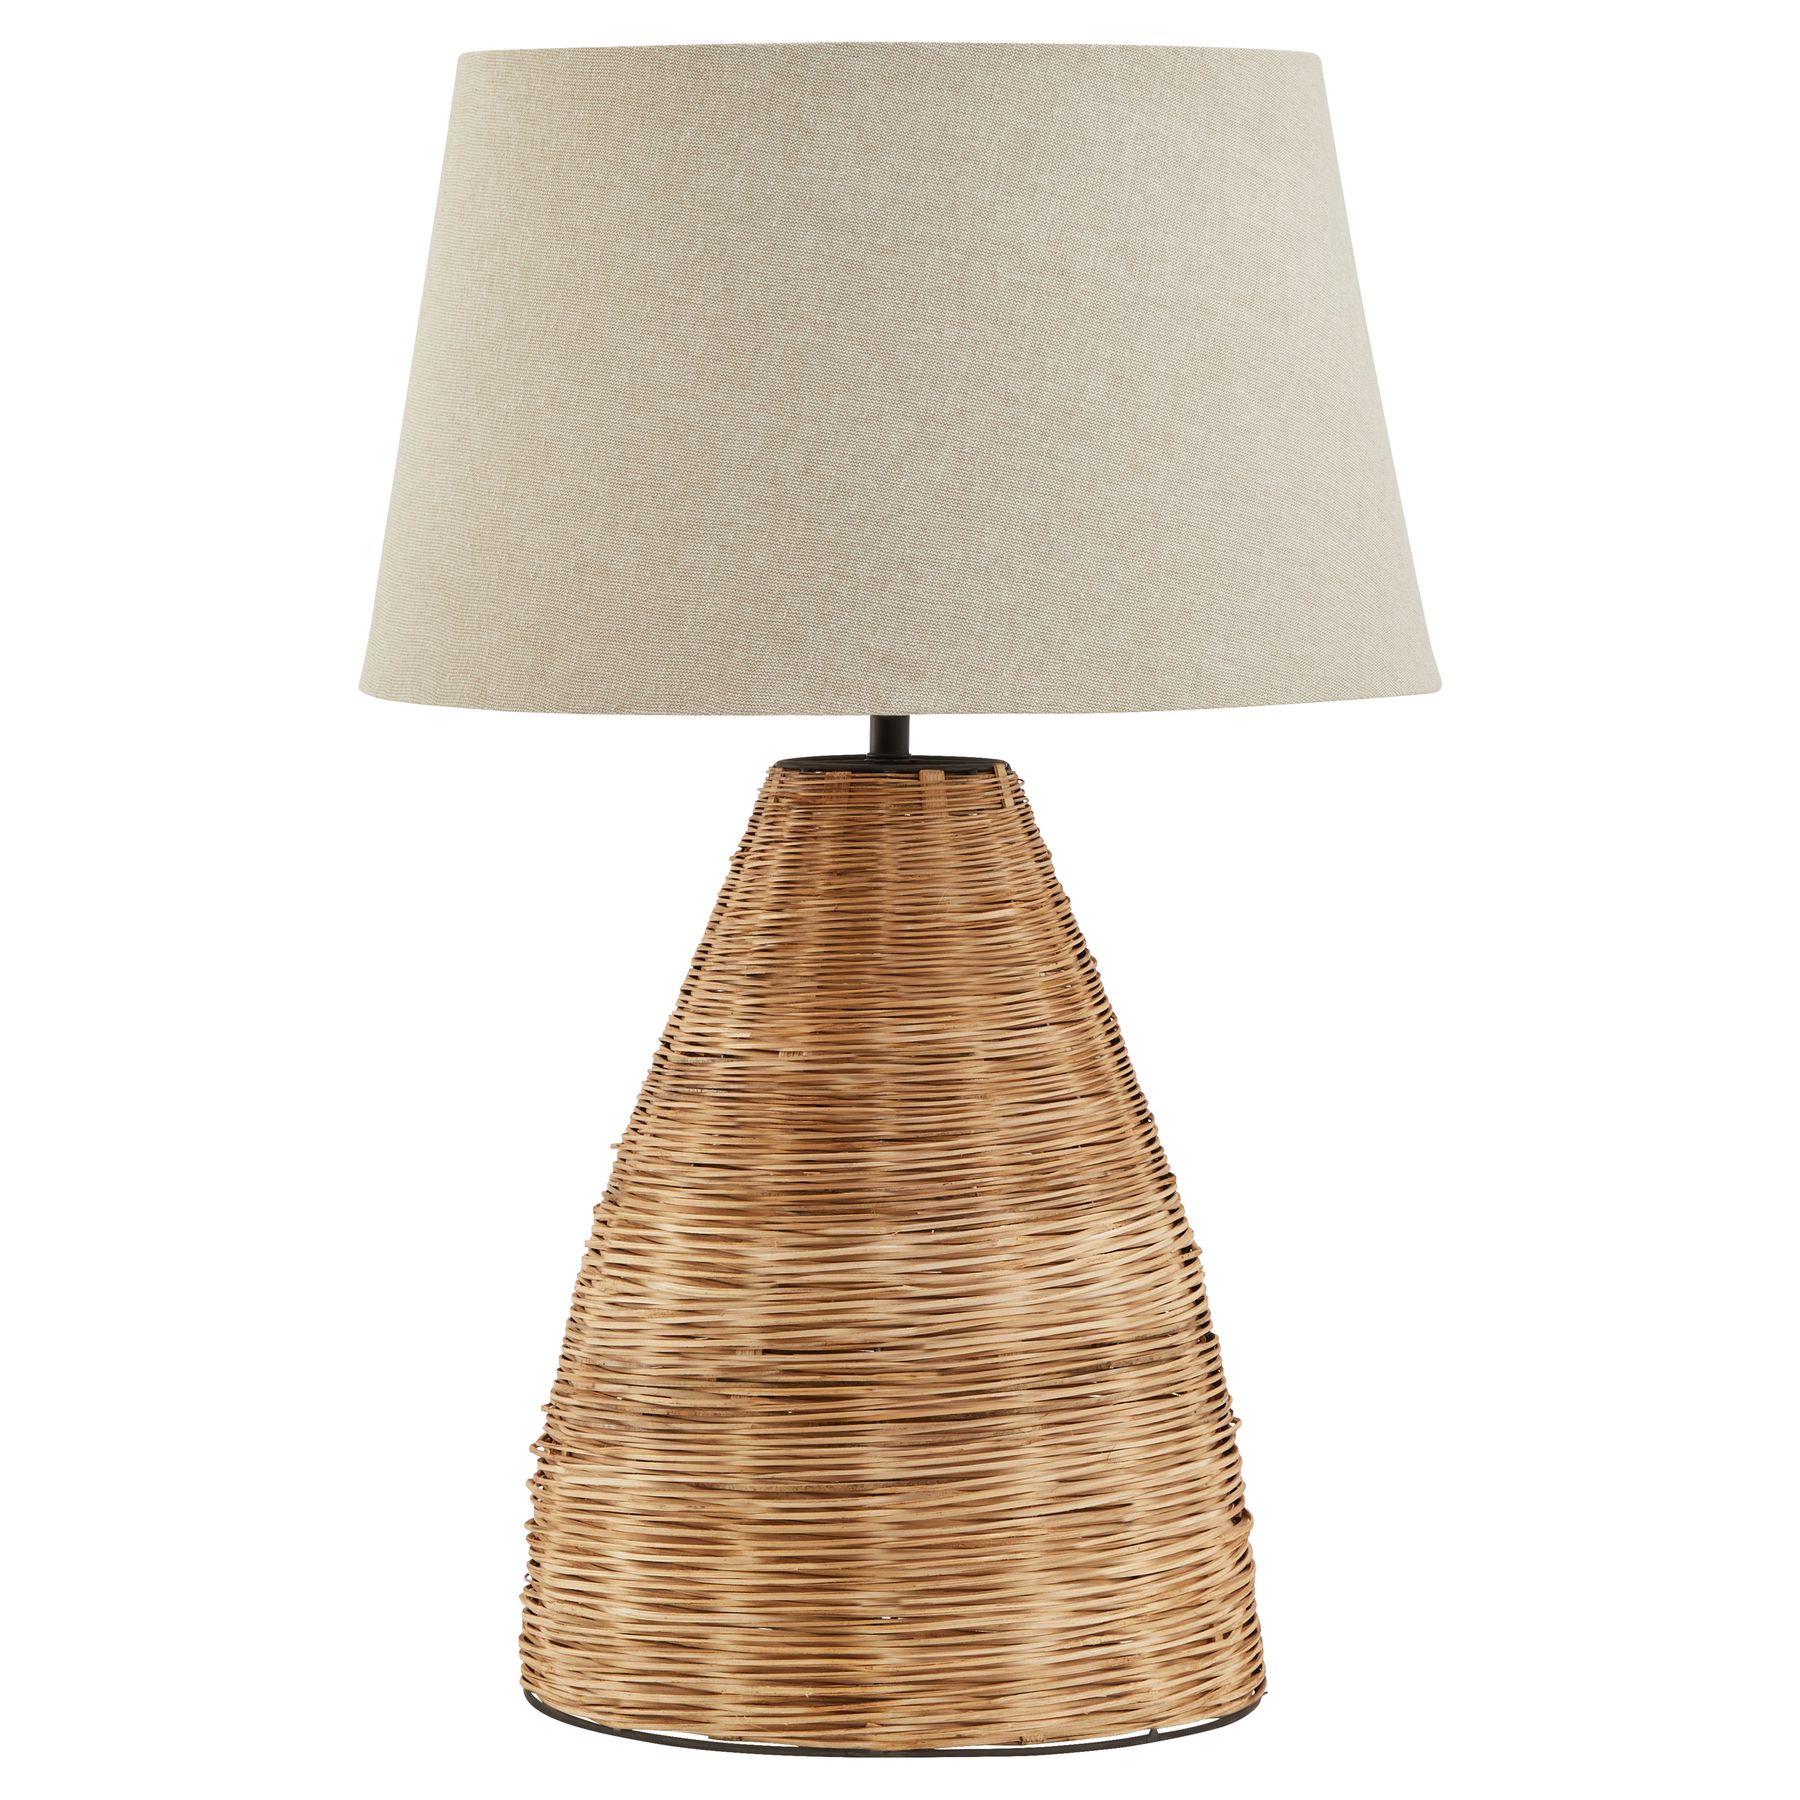 Conical Wicker Table Lamp With Linen Shade - Image 1